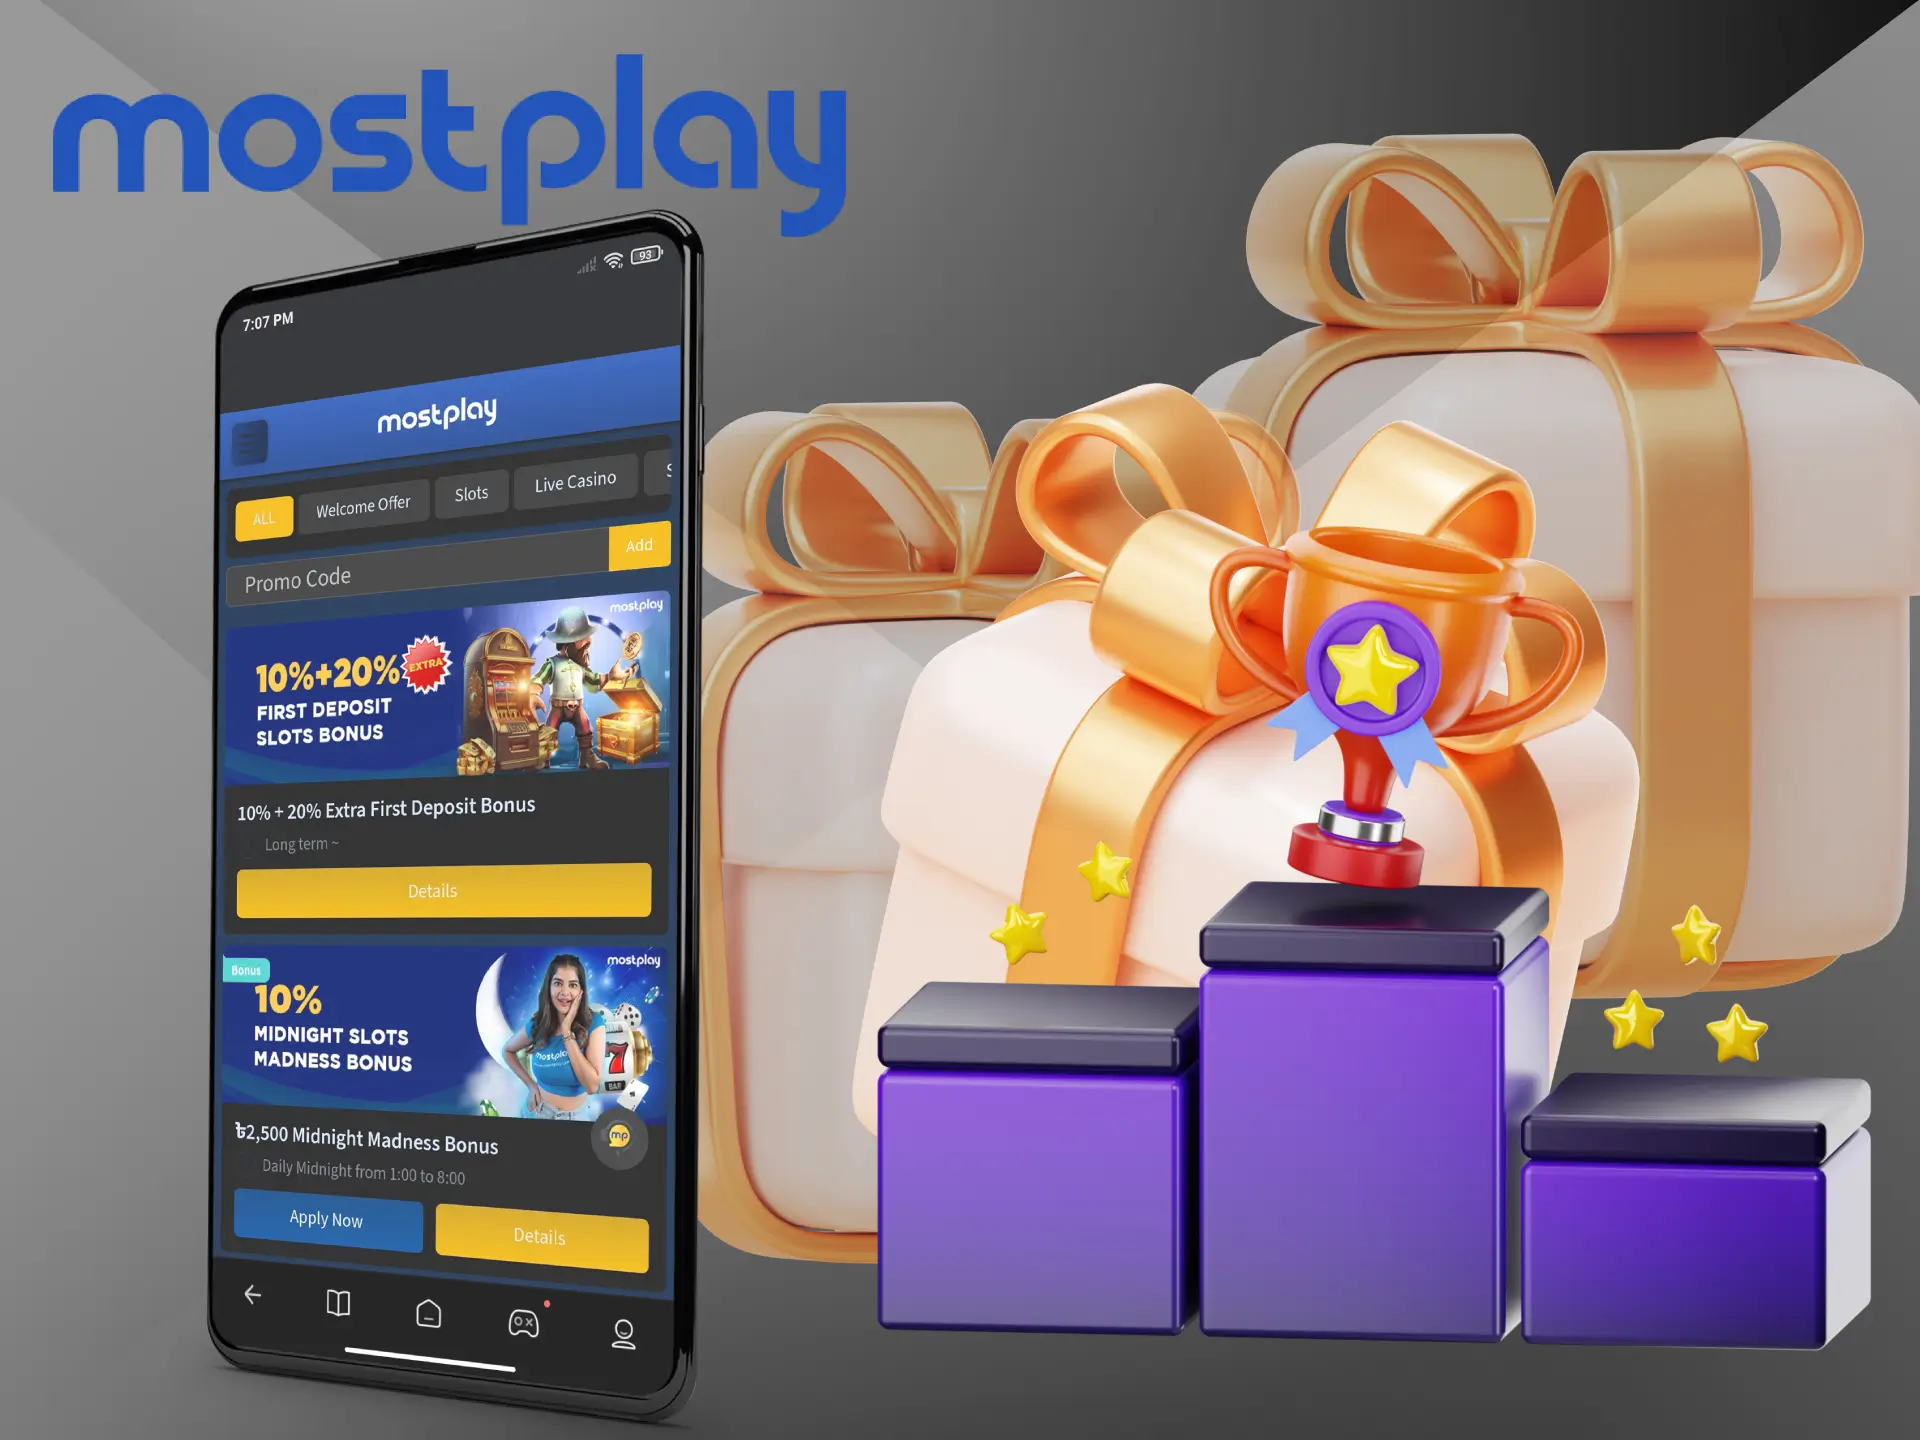 Compete with other players in accurate predictions and pick up bonuses from Mostplay Casino.